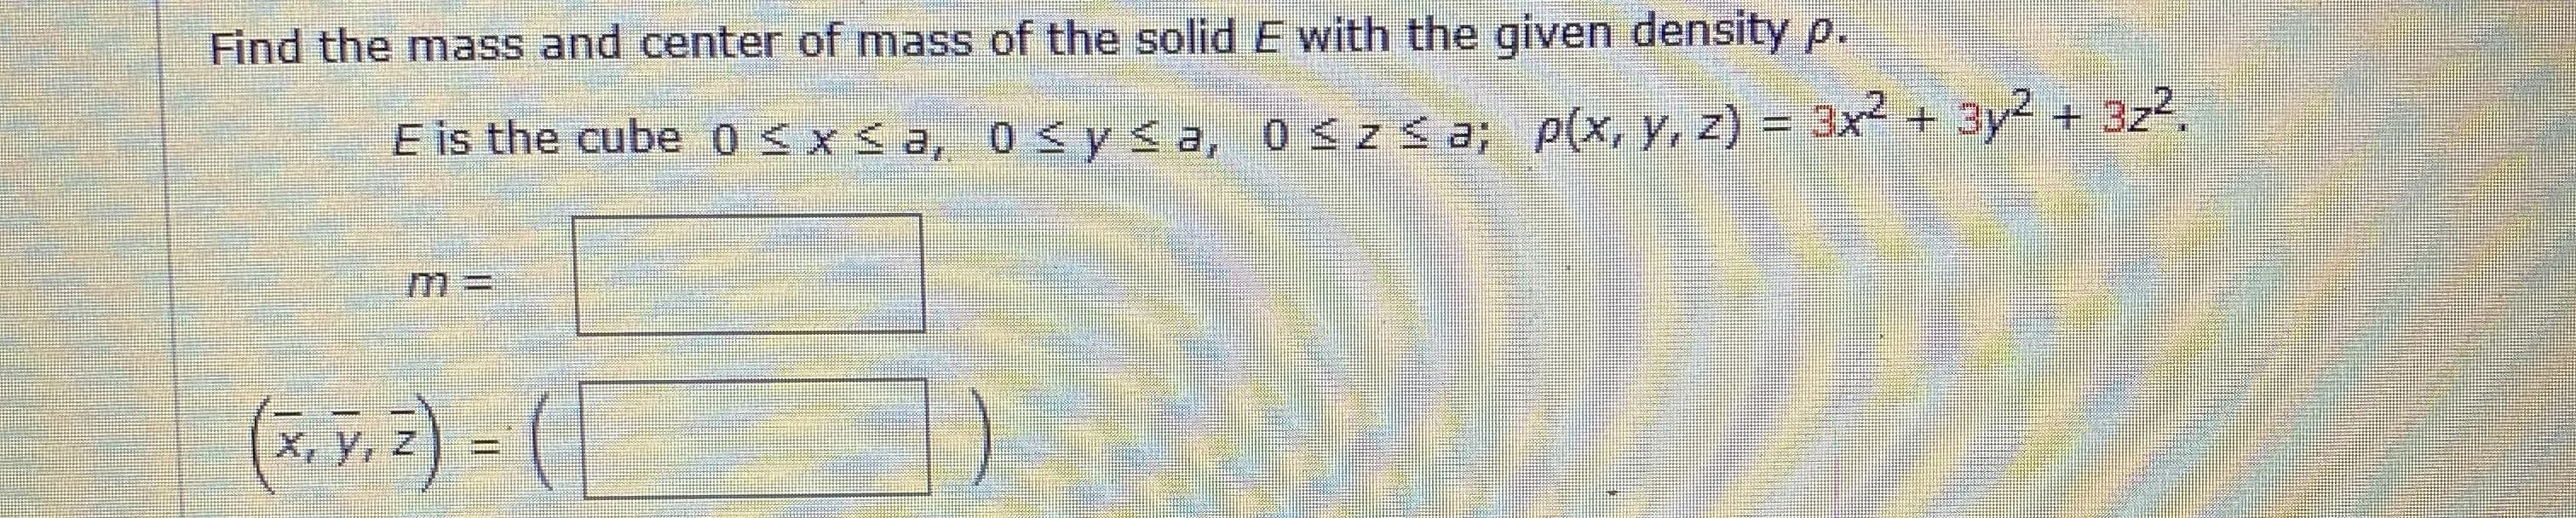 Find the mass and center of mass of the solid E with the given density p.
E is the cube 0 < x < a, 0 < y< a, 0szś a; p(x, y, z) = 3x + 3y2 + 3z.
(*. v. 2) = (|
X, y, Z
